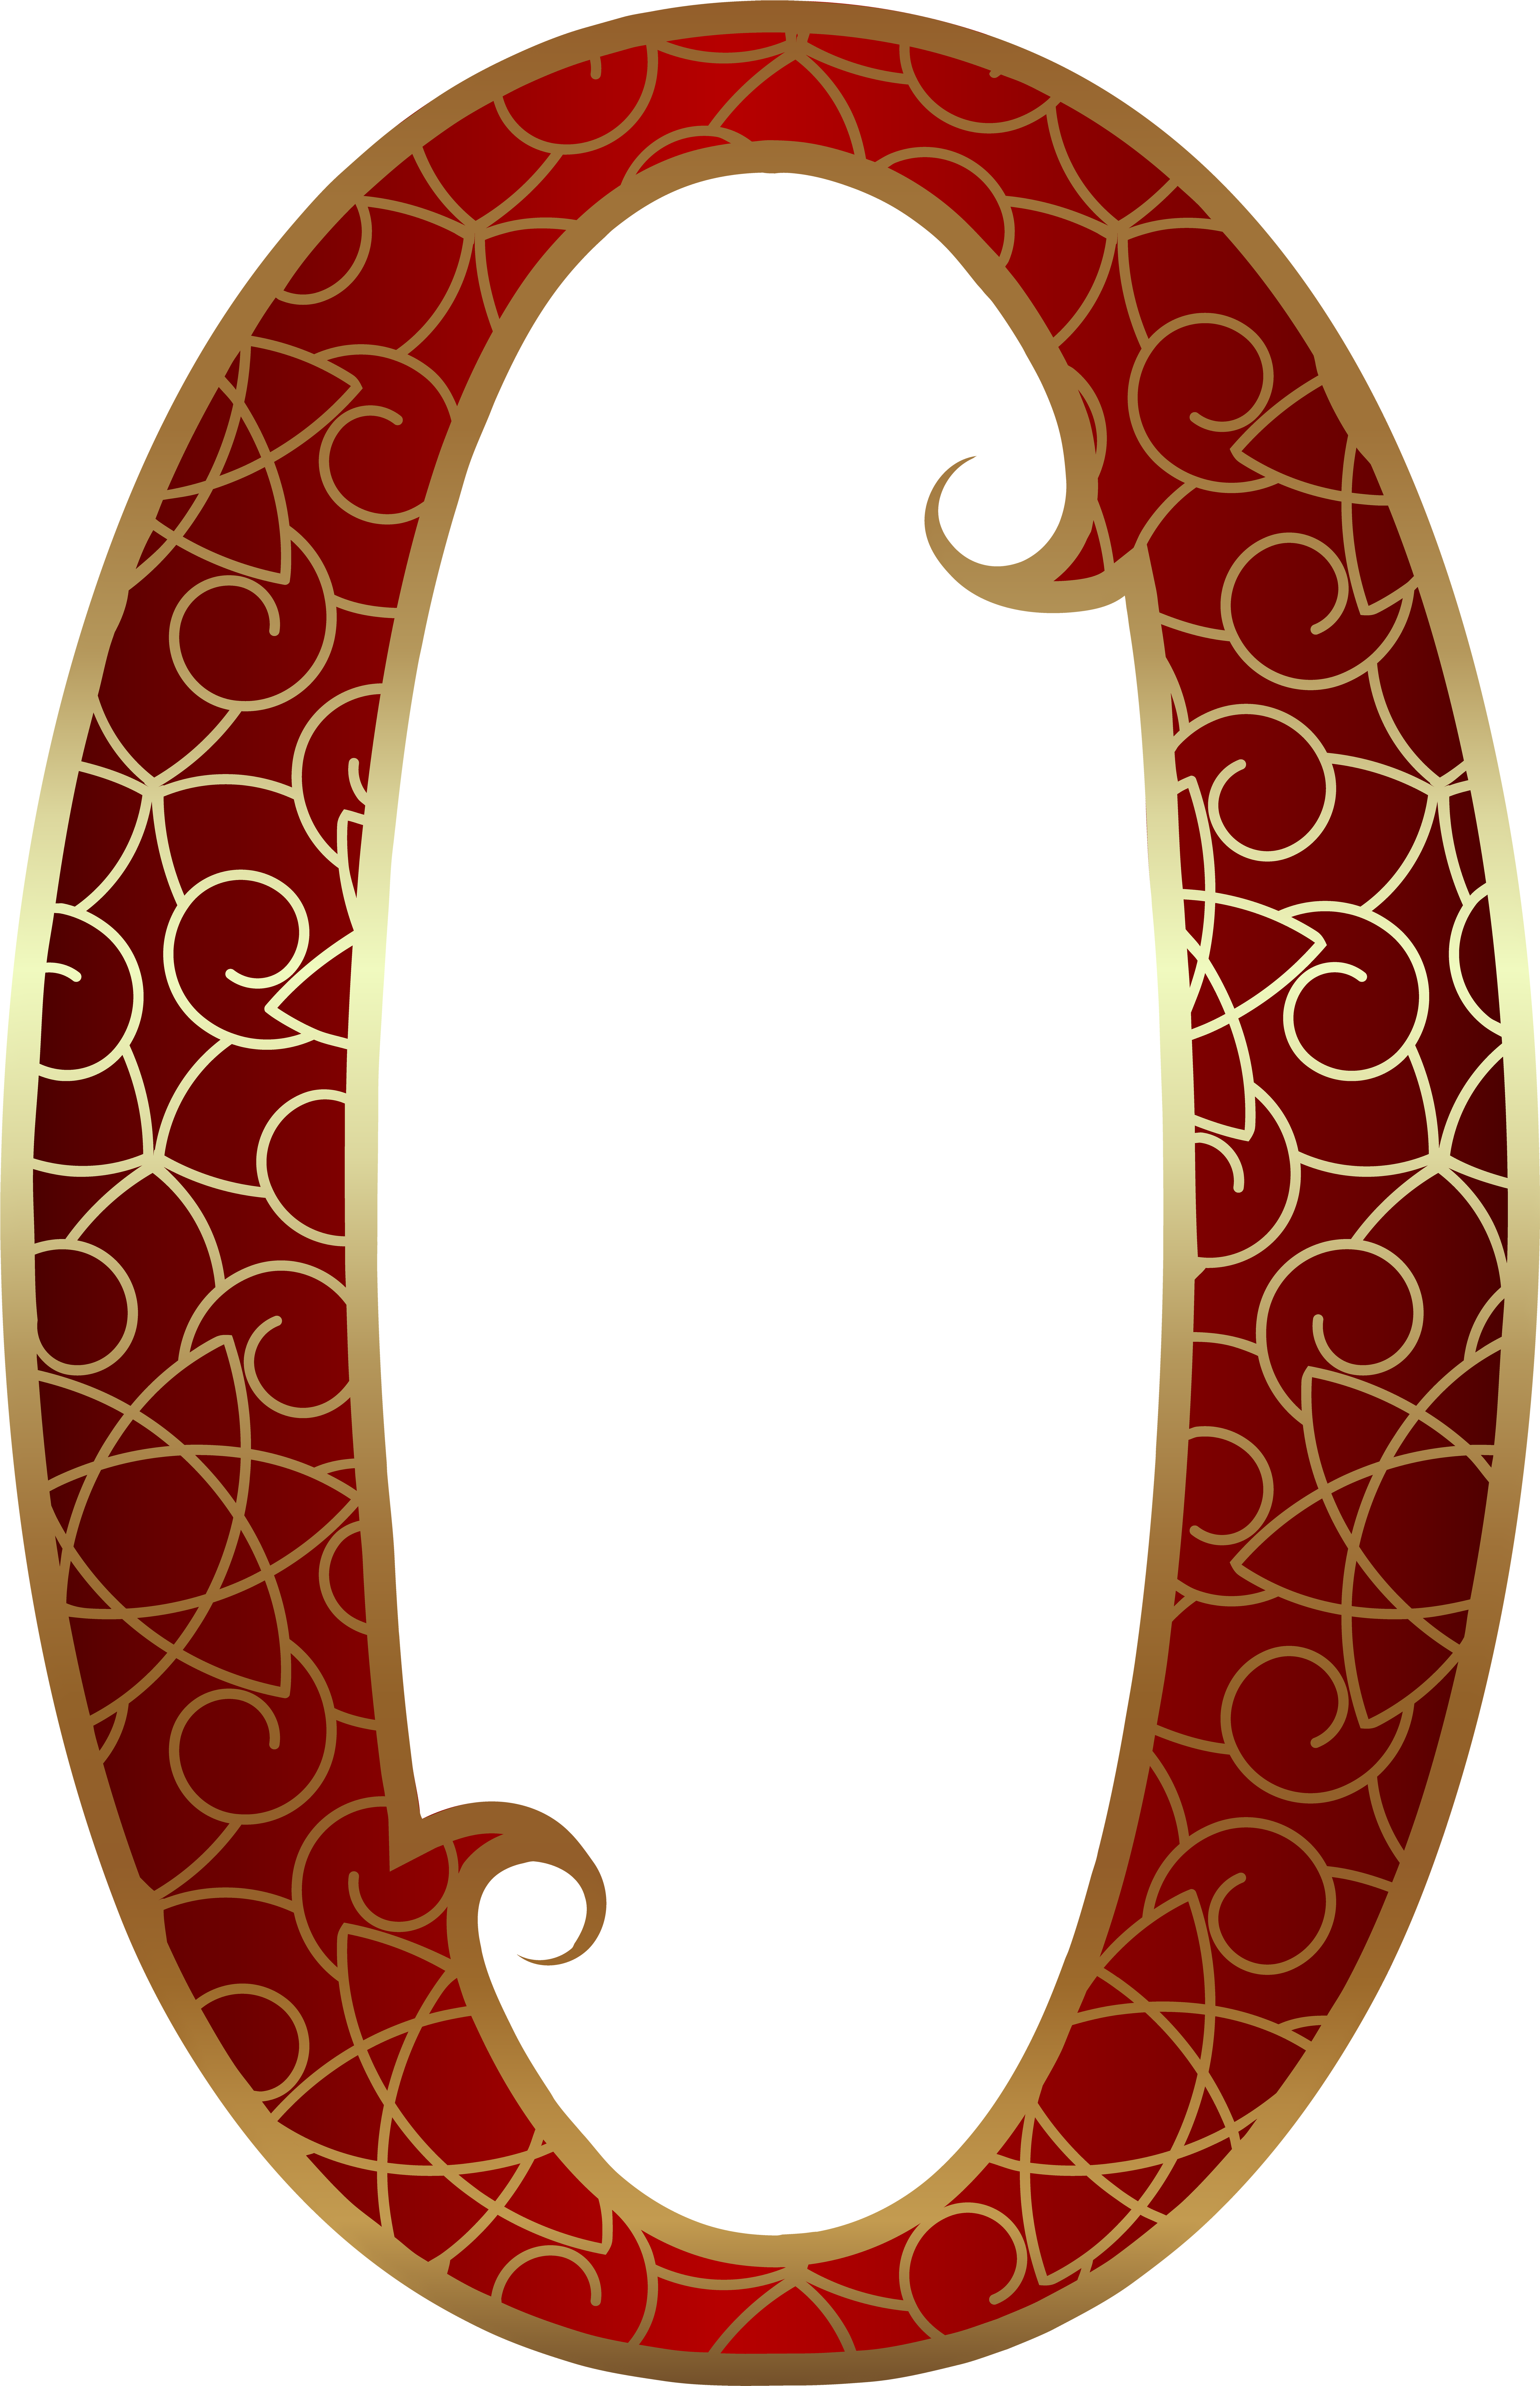 A Gold And Red Design On A Black Background